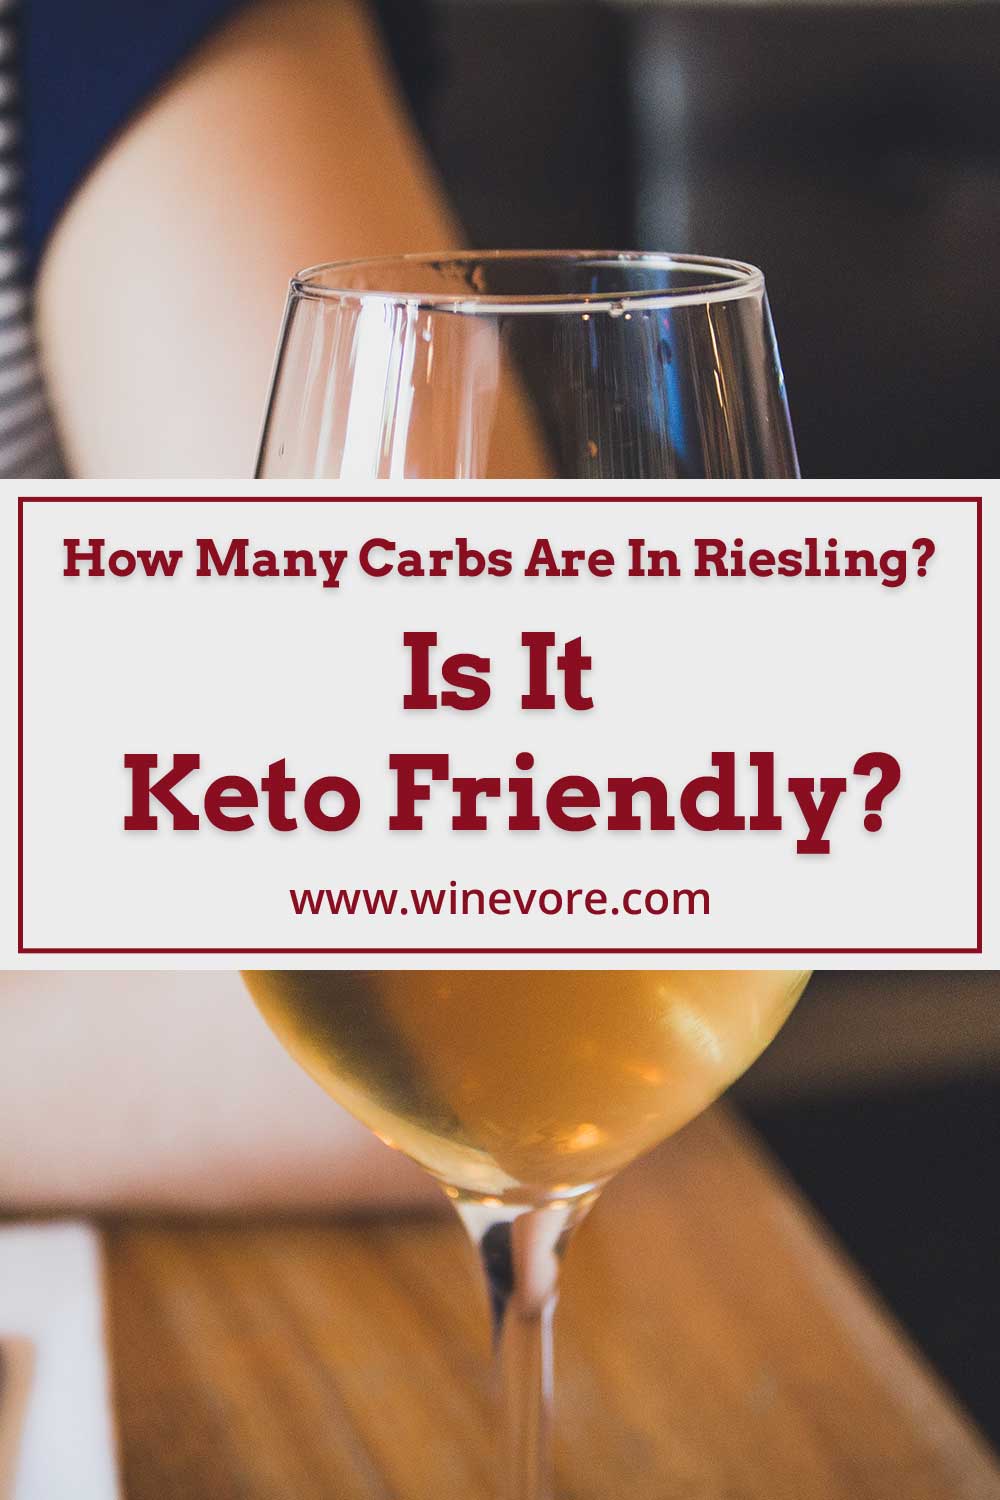 A close up image of a wine glass - How Many Carbs Are In Riesling? Is It Keto Friendly?